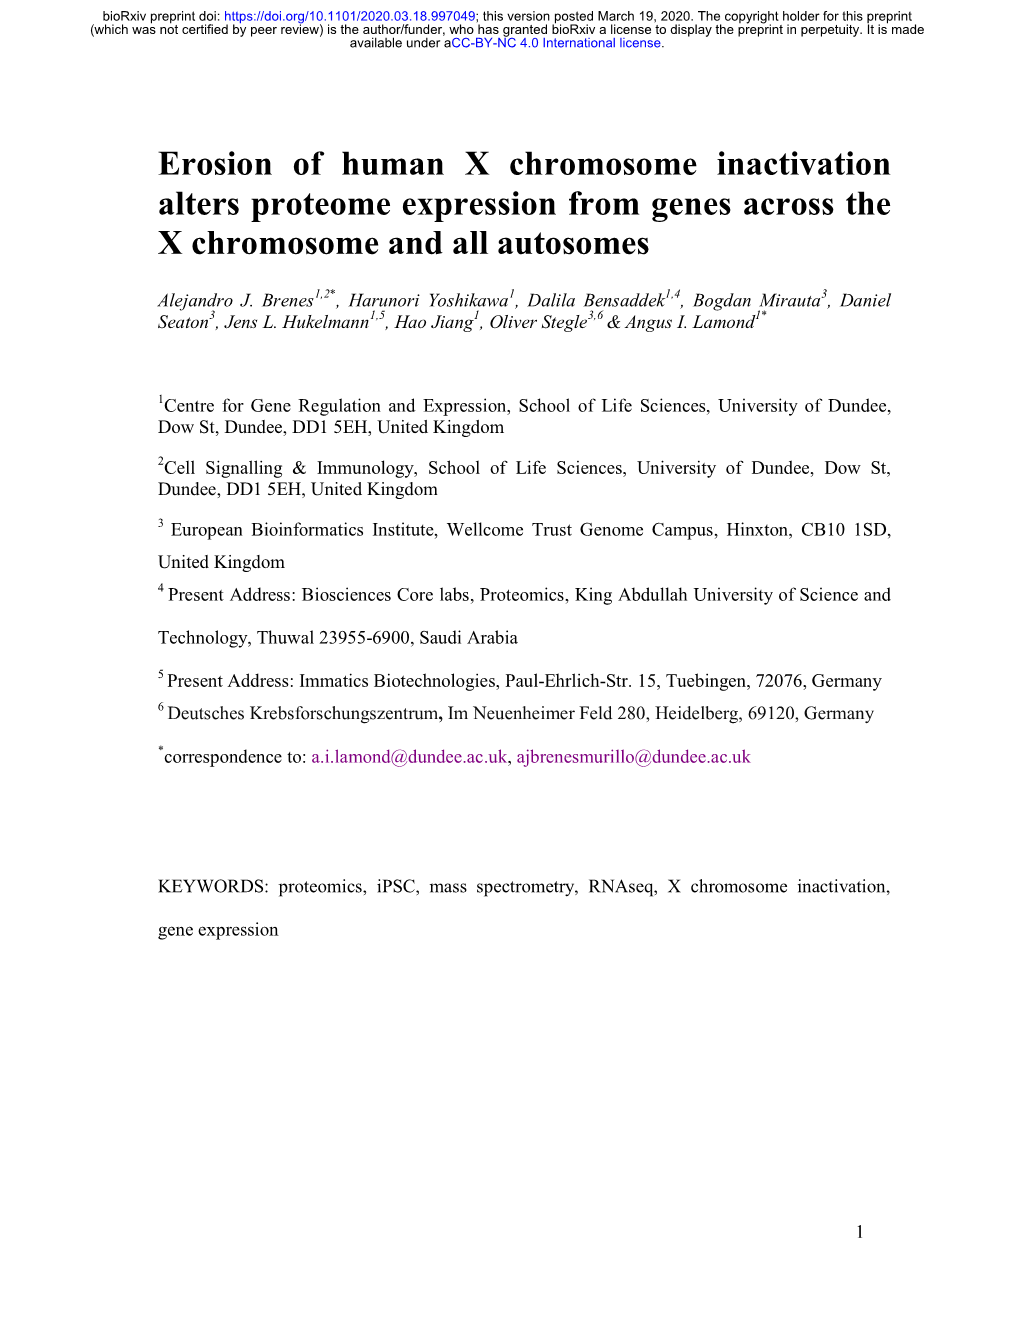 Erosion of Human X Chromosome Inactivation Alters Proteome Expression from Genes Across the X Chromosome and All Autosomes